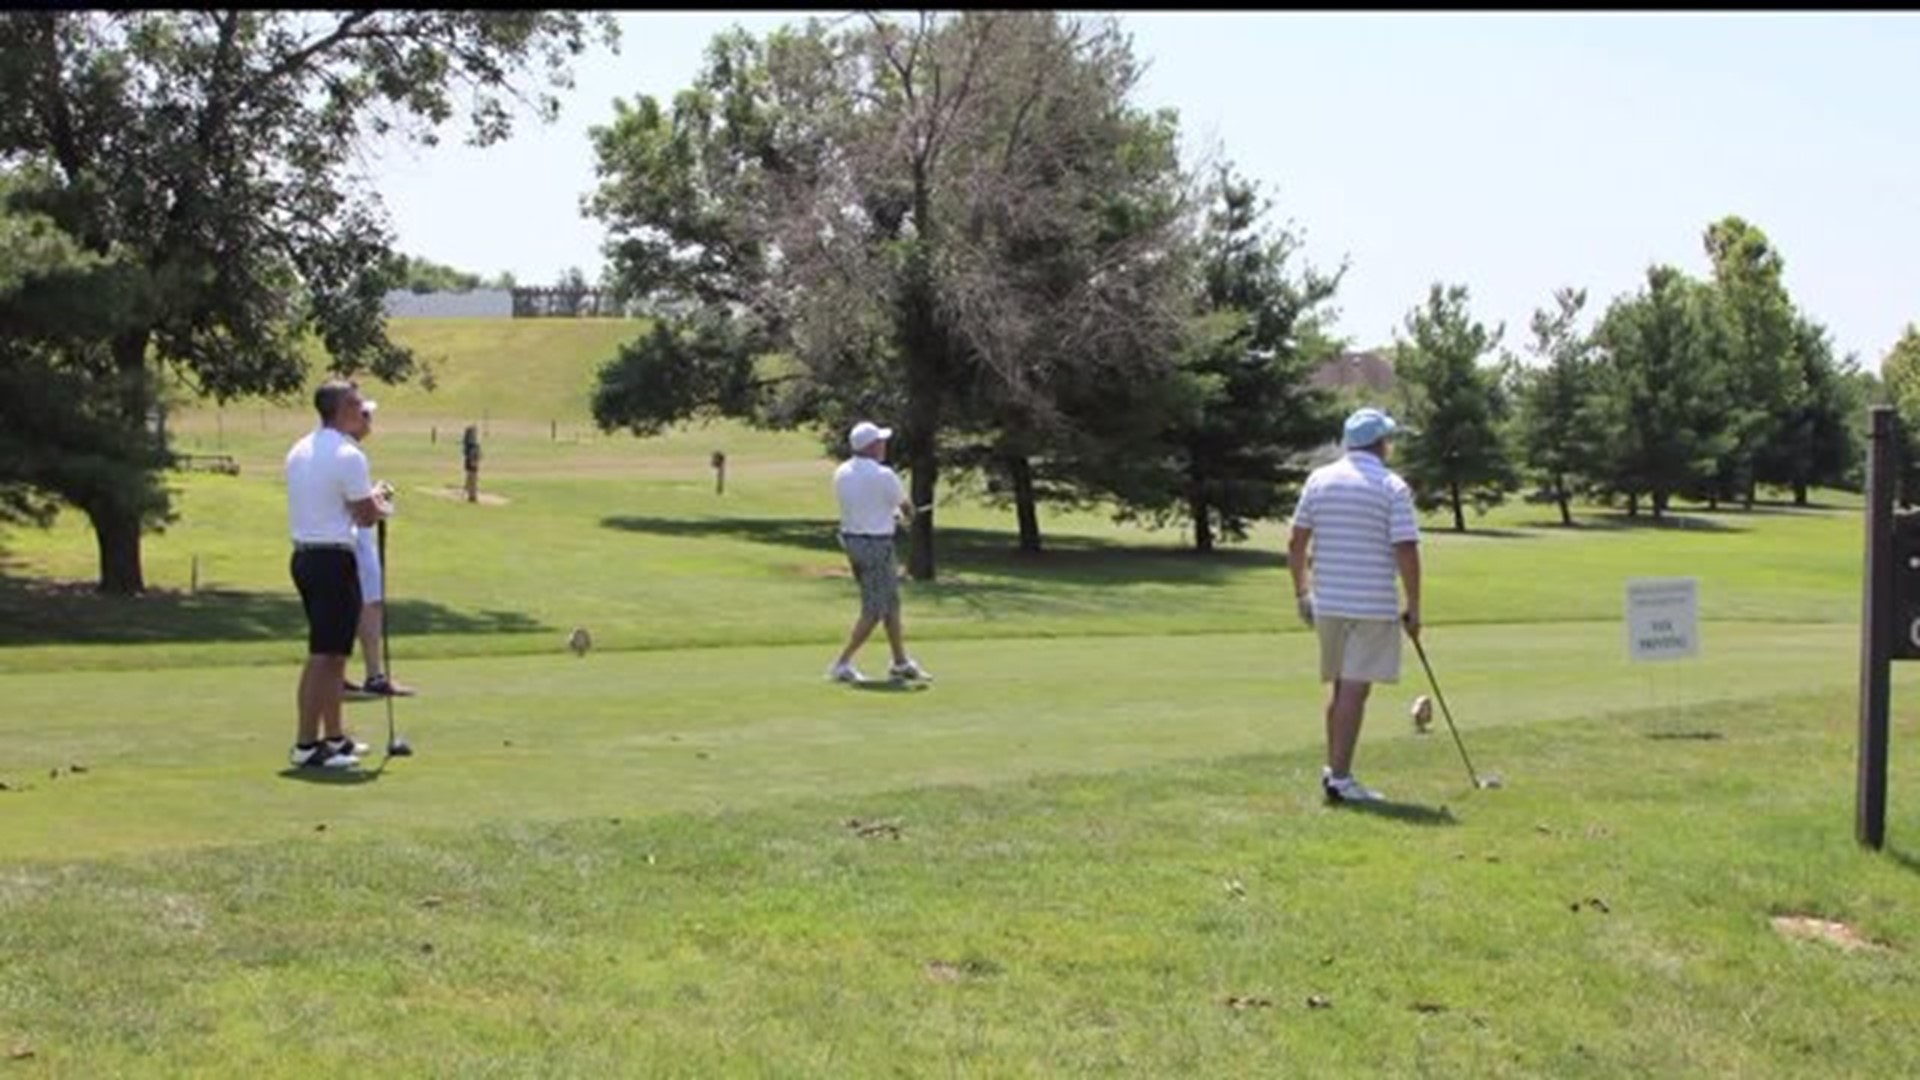 McDonald`s owners and operators are gathering to tee off for a great cause